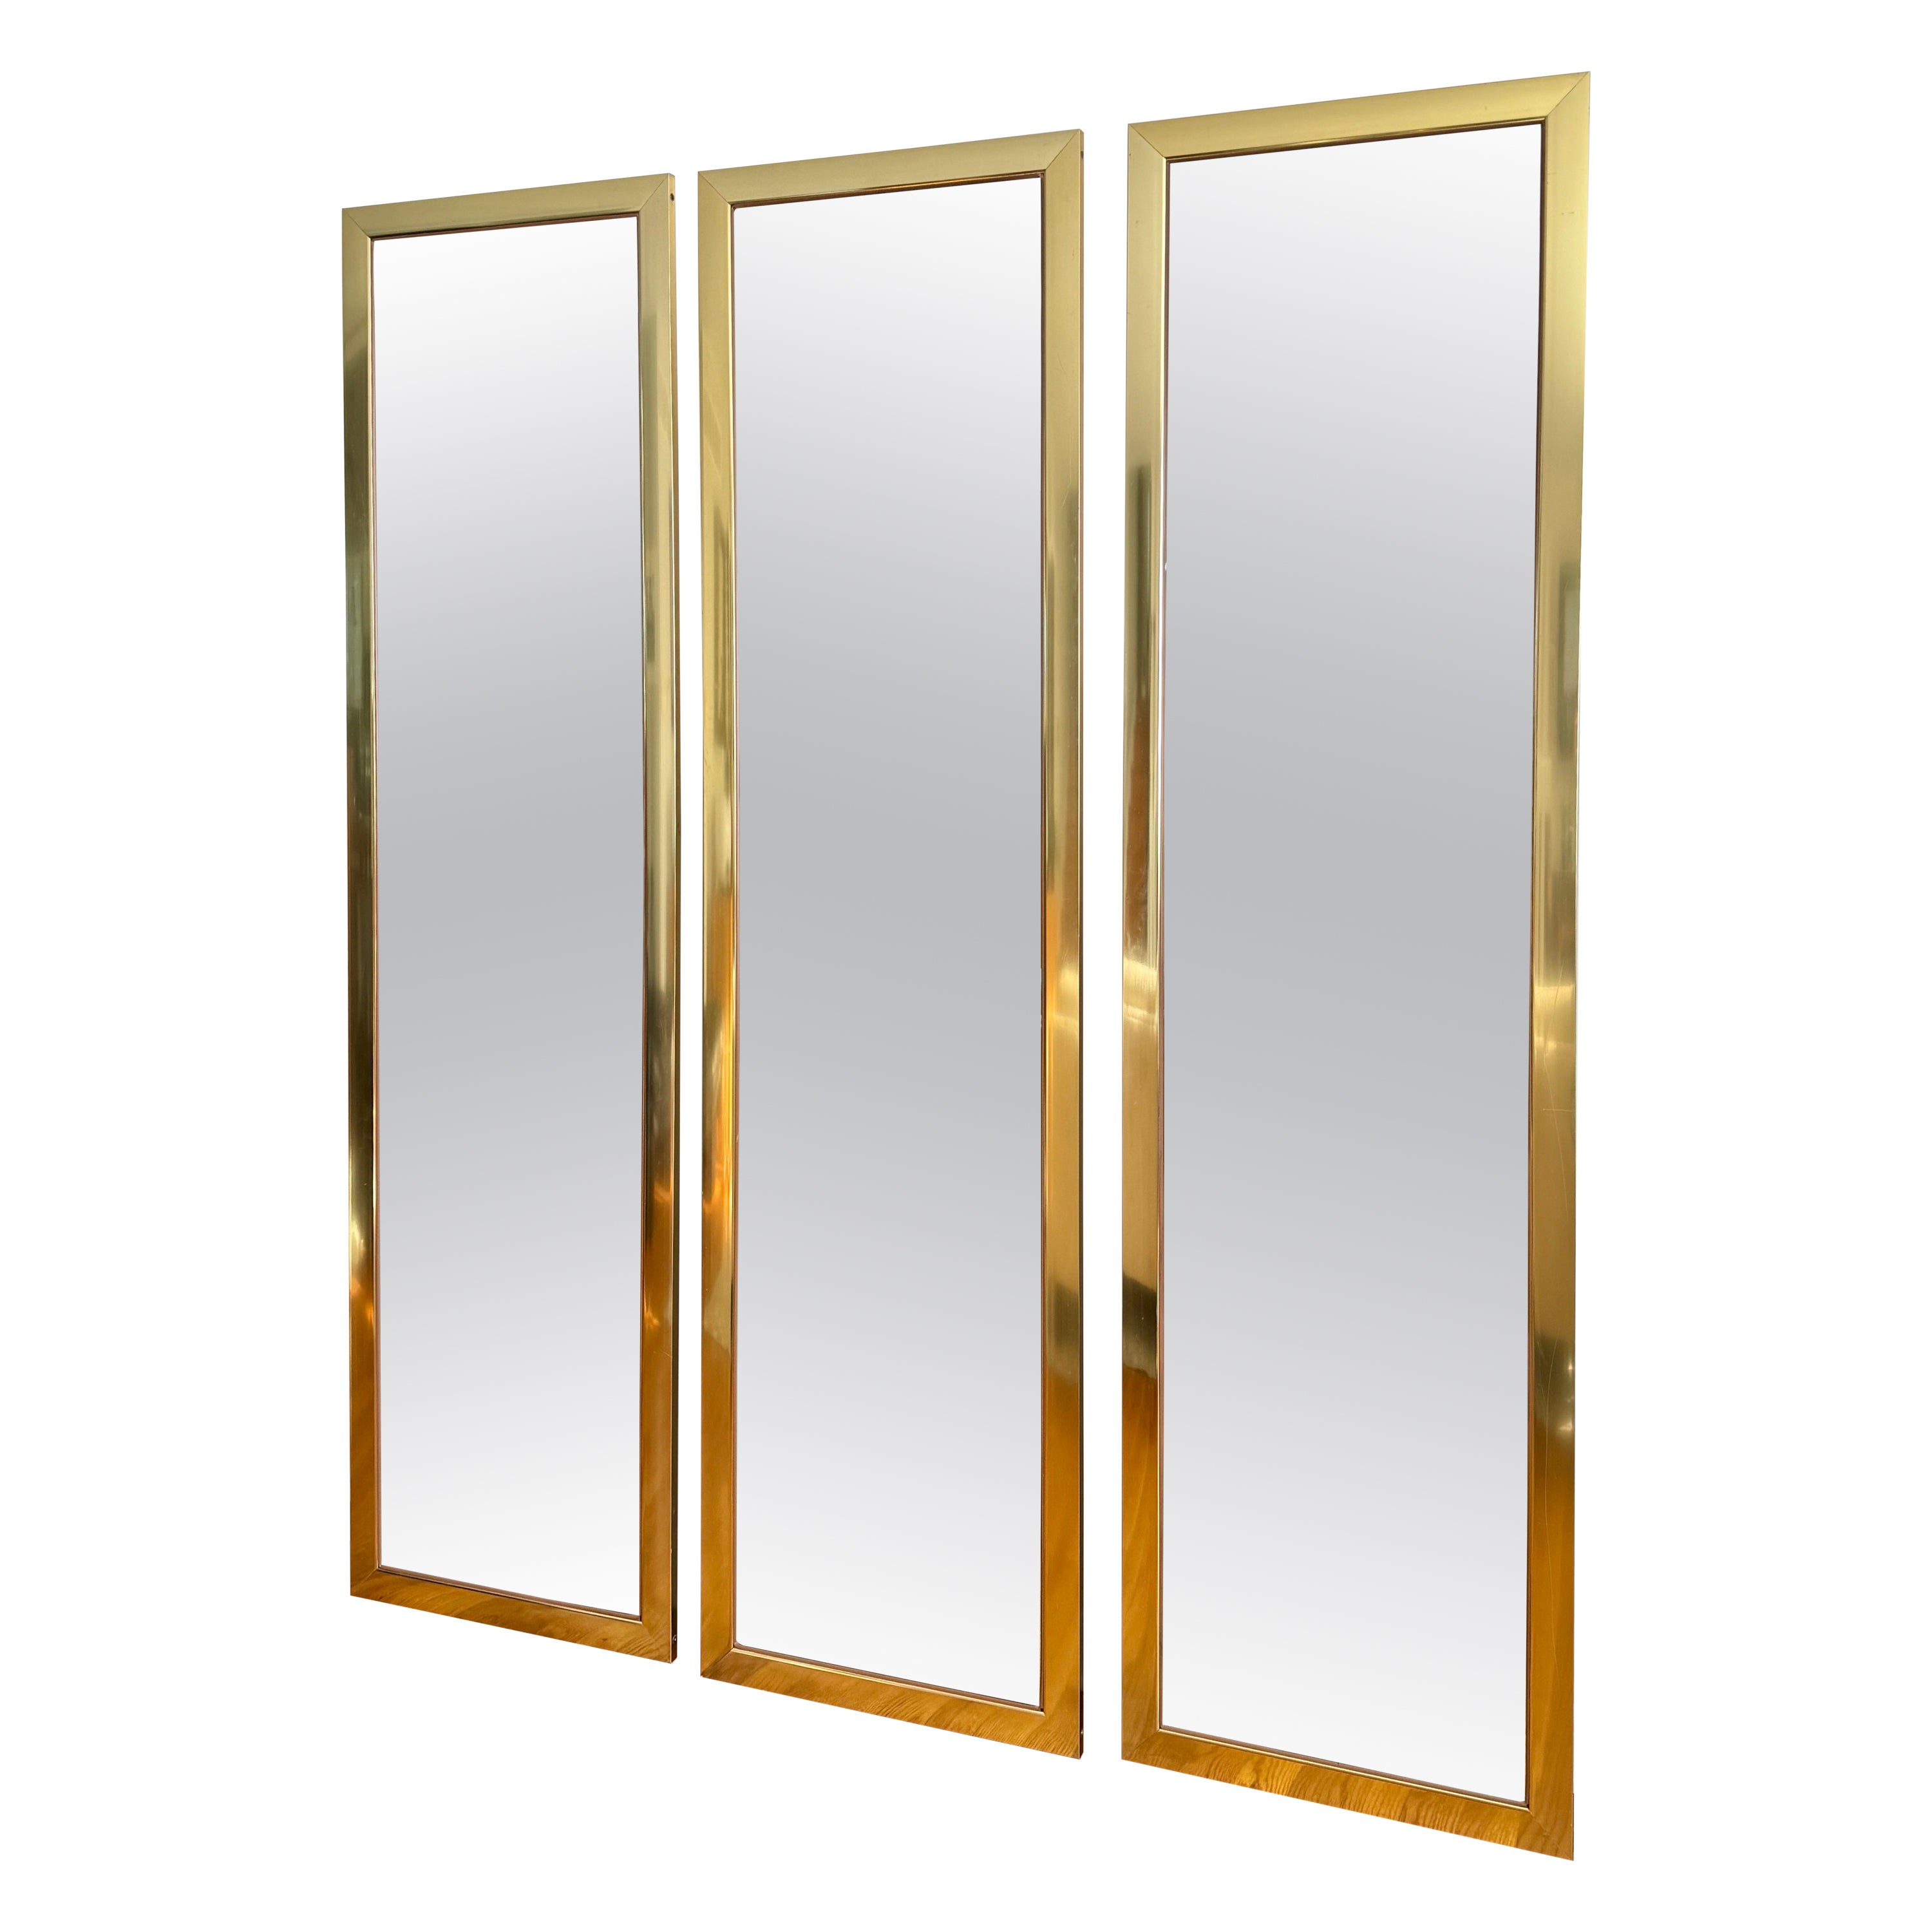 Vintage Hollywood Regency Style Full Length Floor or Wall Mirrors - Set of Three For Sale